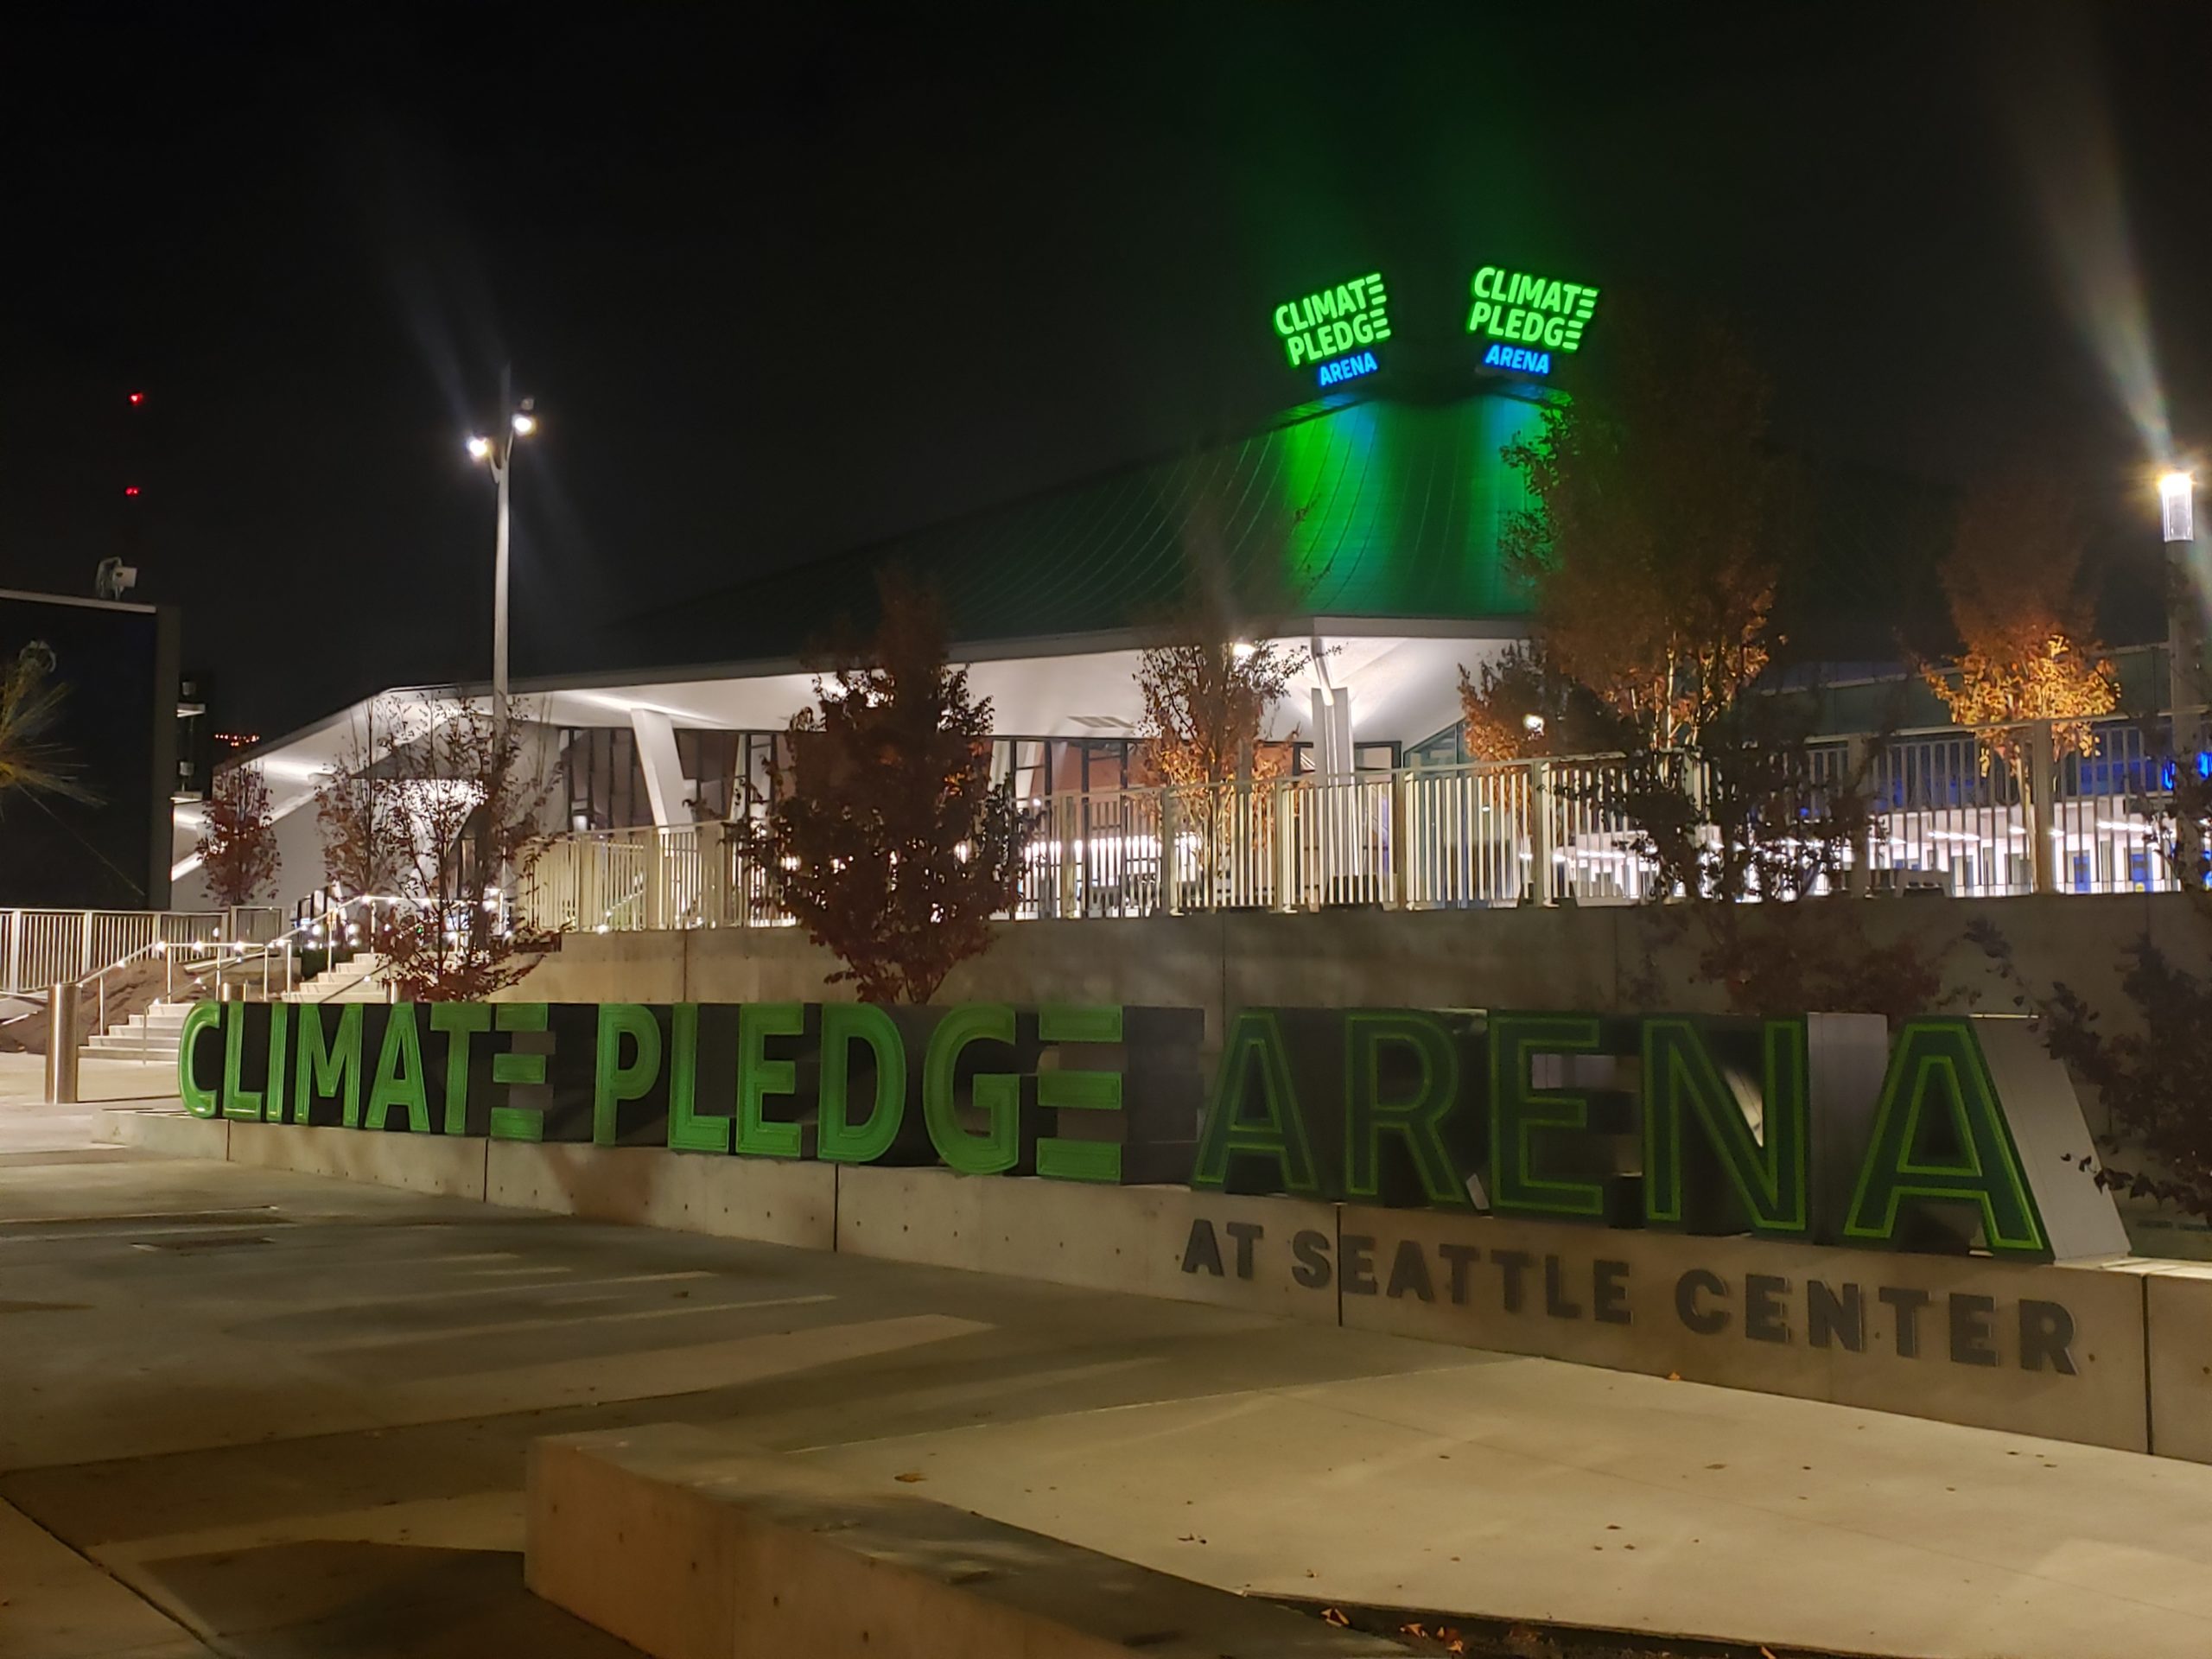 First look at the Seattle Kraken's home, Climate Pledge Arena